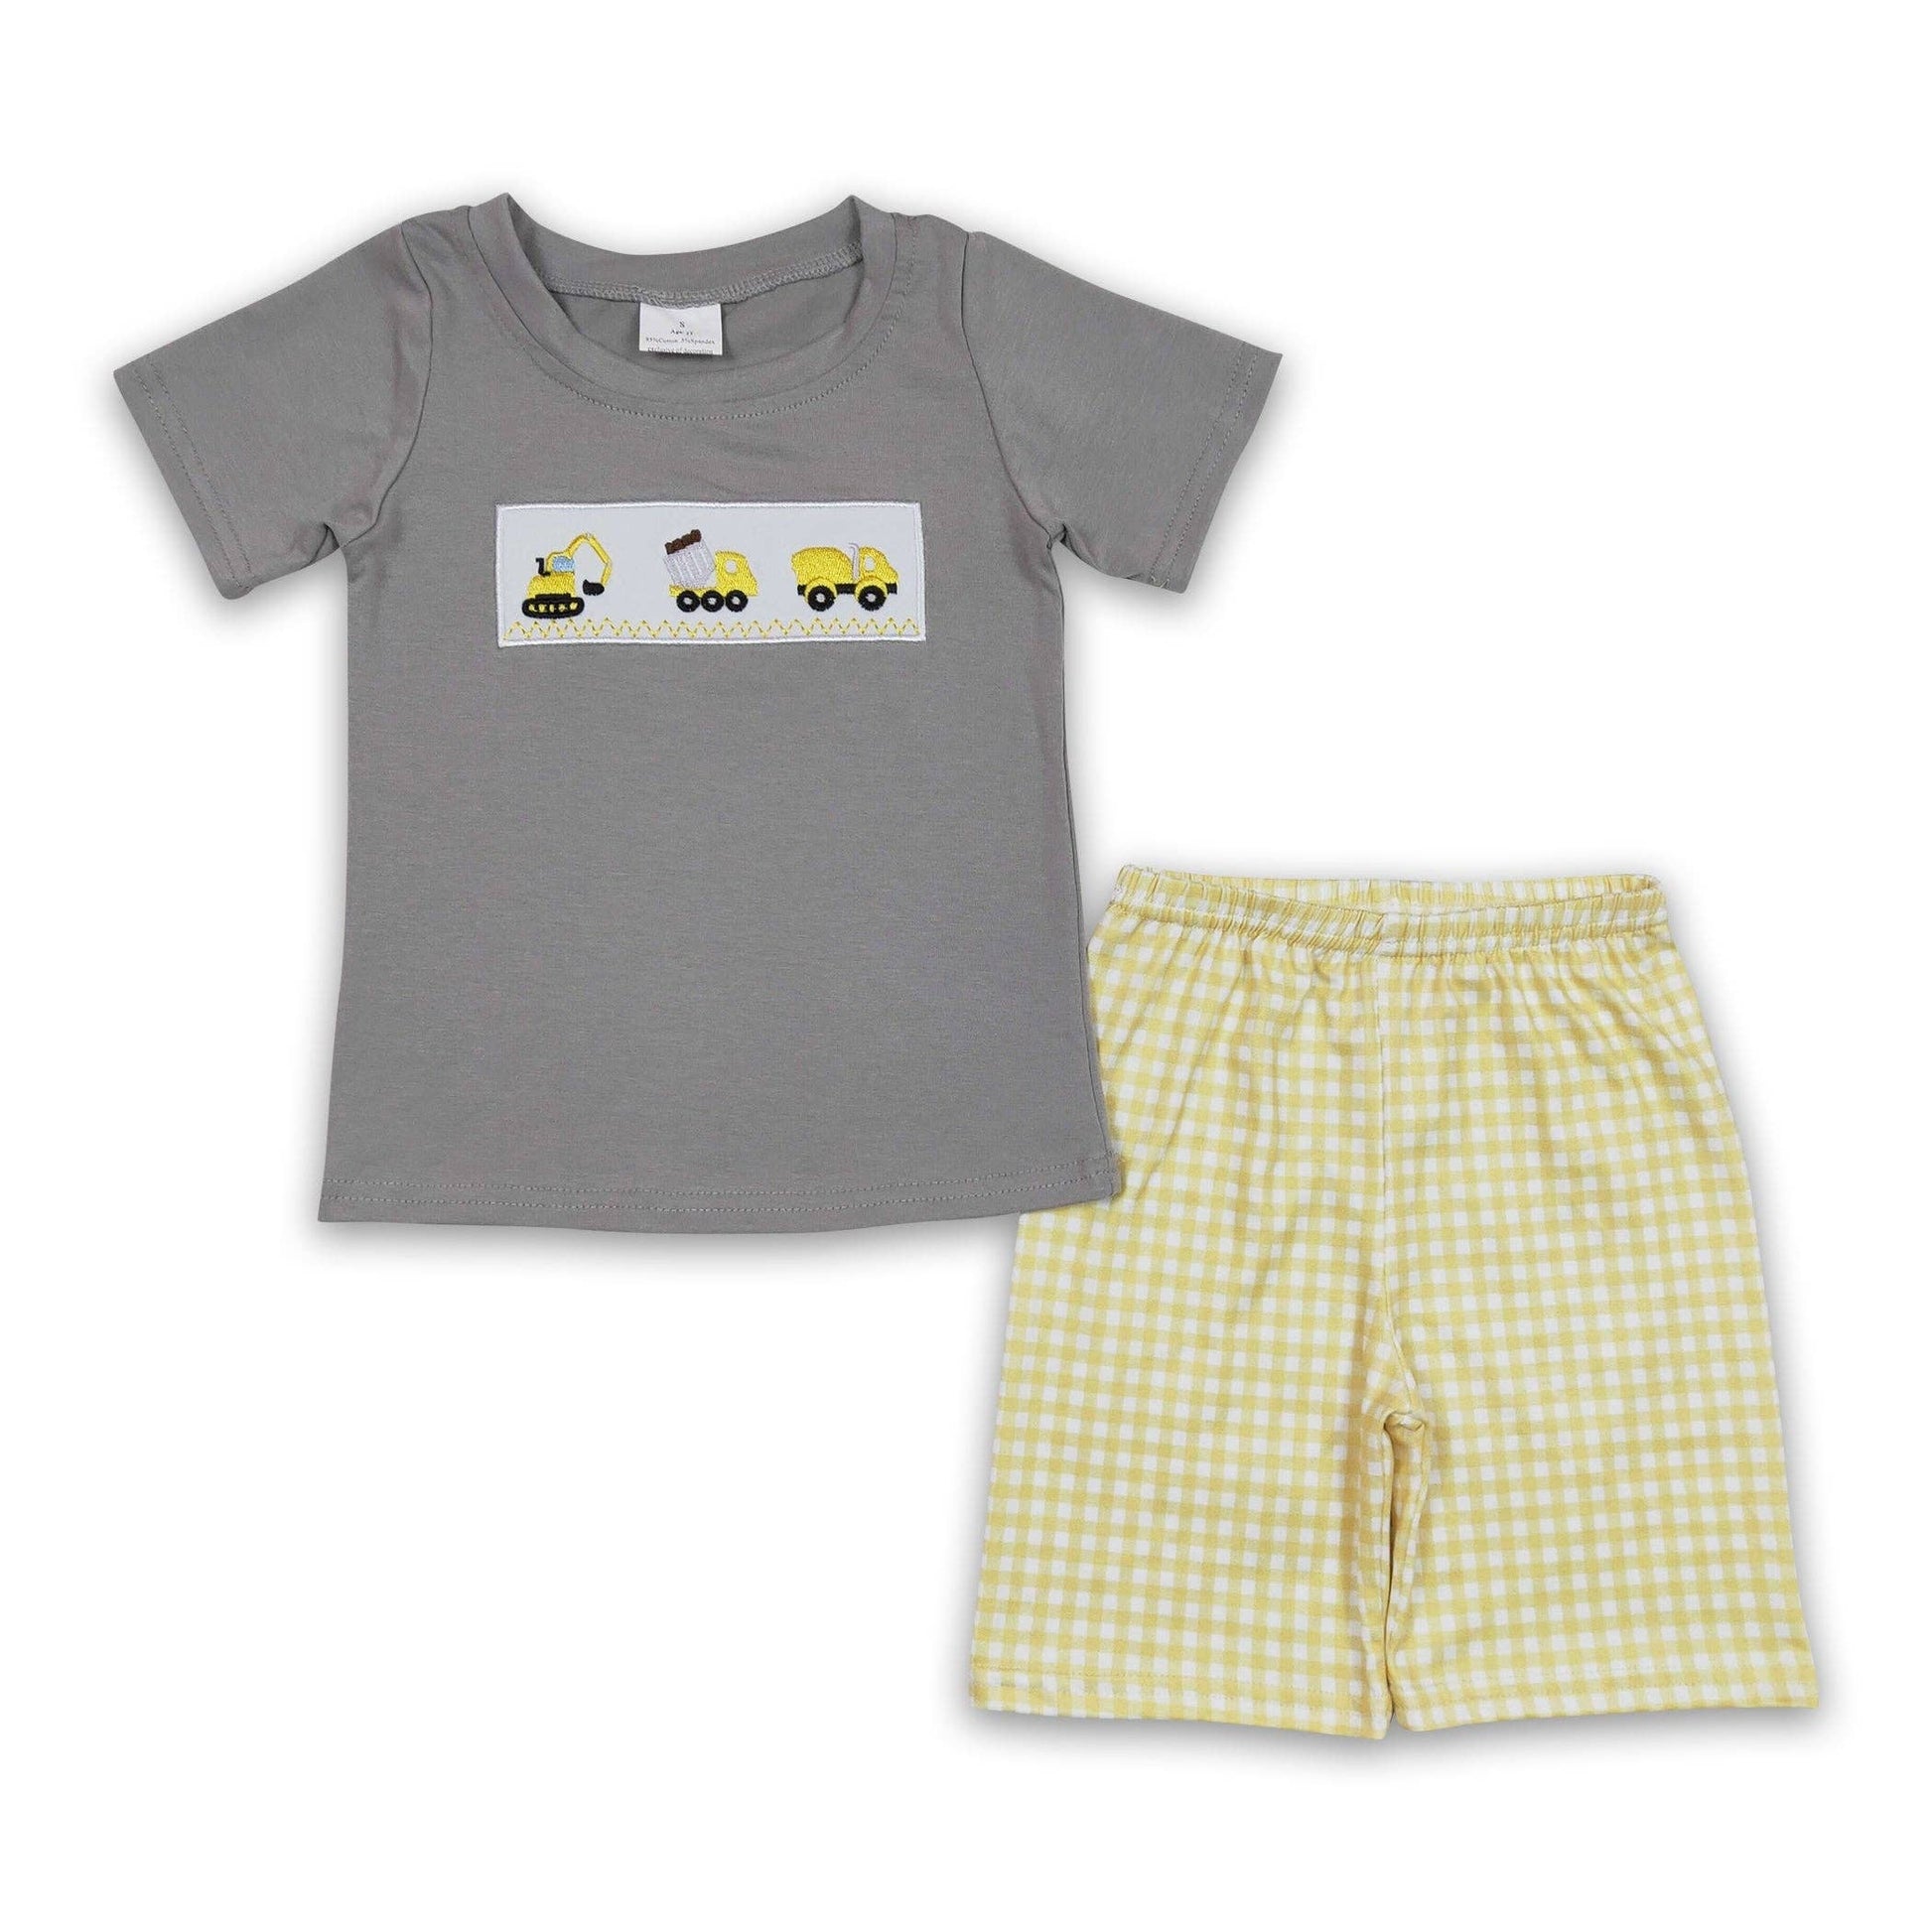 A gray and yellow engineering vehicle embroidery boy outfits pajama set from Yawoo Garments for a baby.